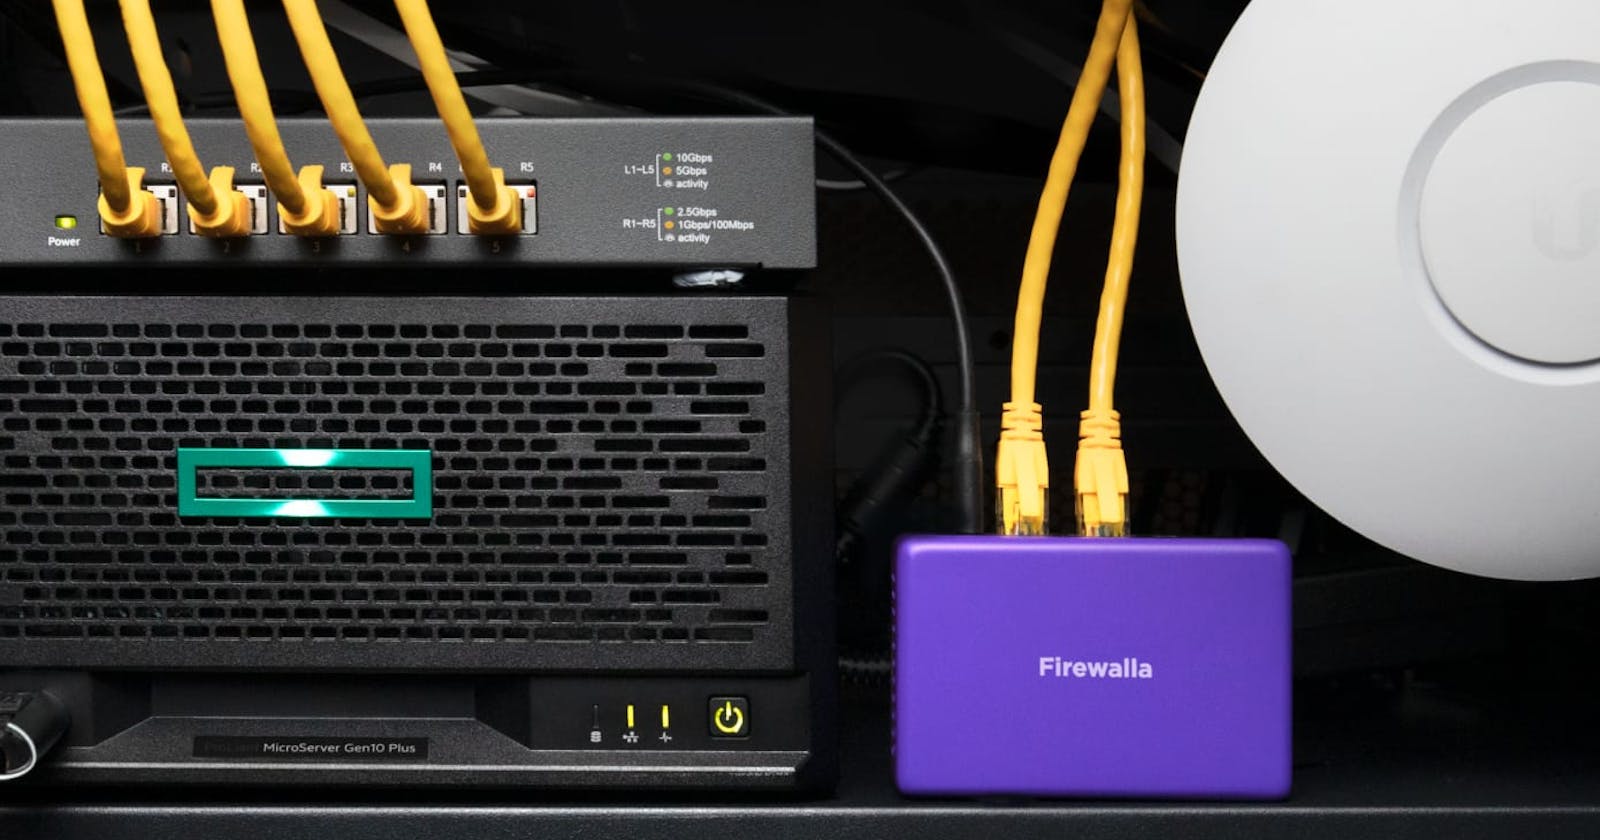 Firewalla Purple, 2.5 GbE, and Wi-Fi 6 APs: A late-2021 home + work networking setup that won't break the bank (or your spirit)